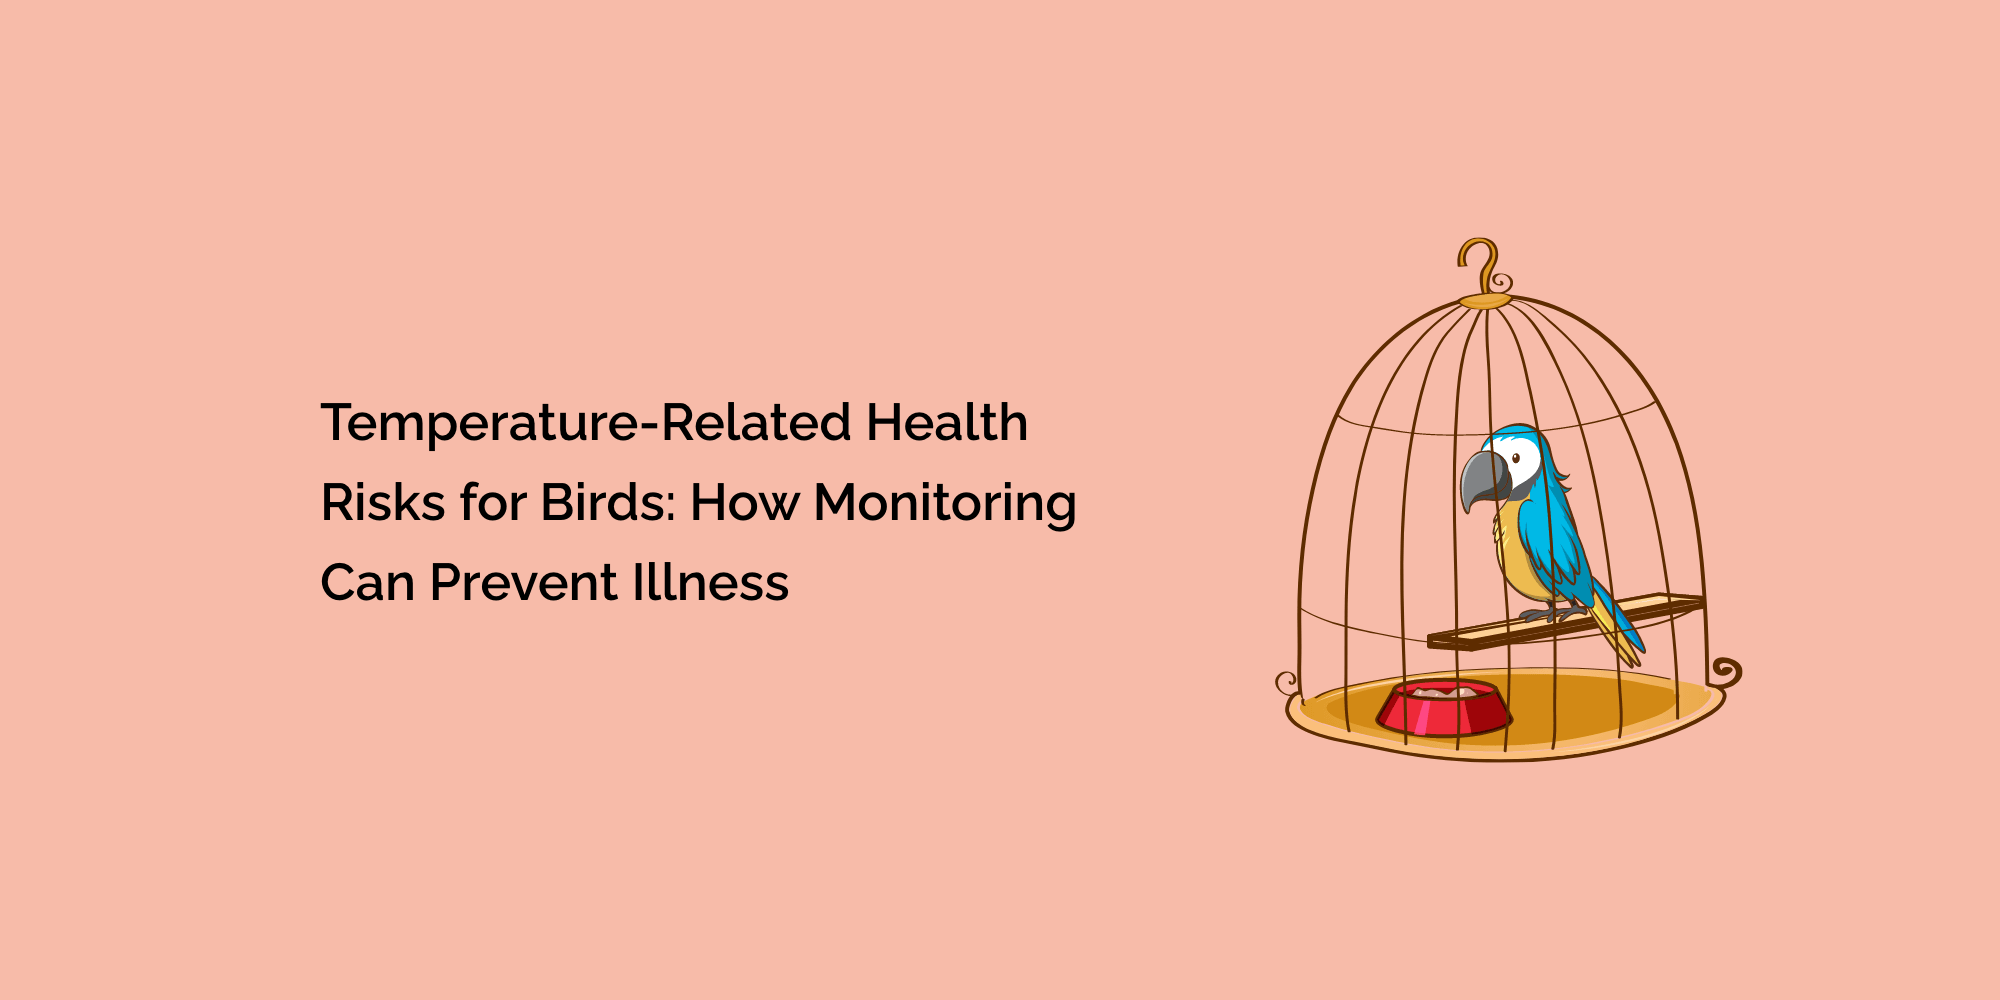 Temperature-Related Health Risks for Birds: How Monitoring Can Prevent Illness